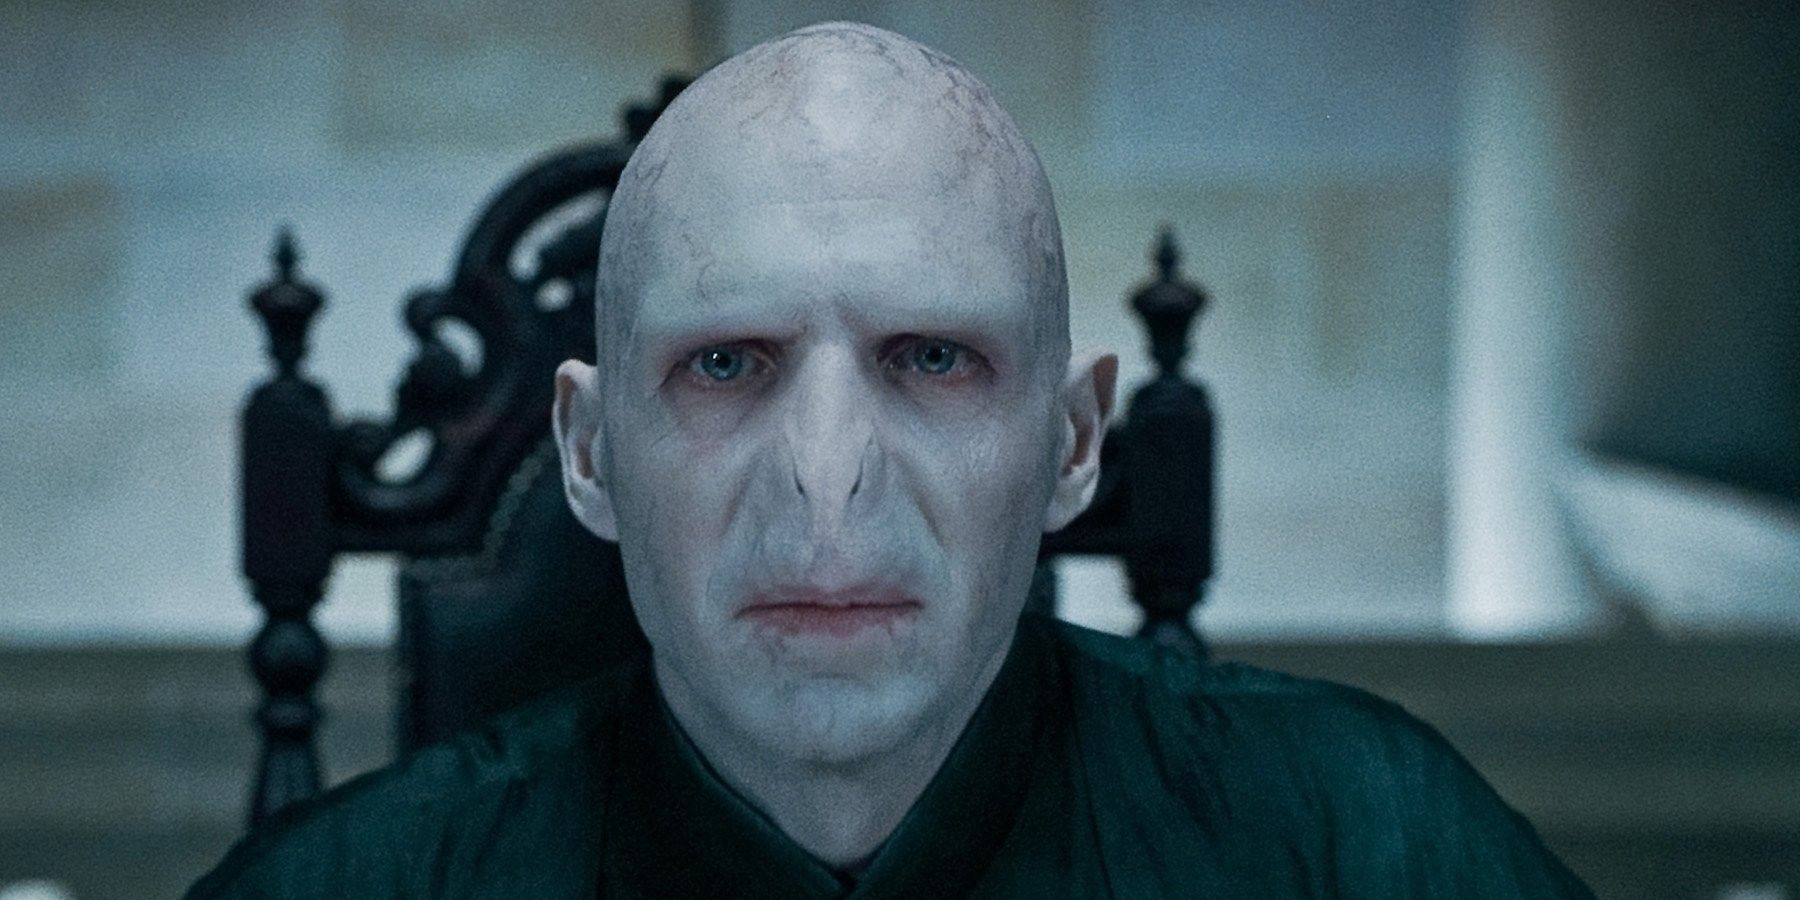 Ralph Fiennes as Voldemort in Harry Potter